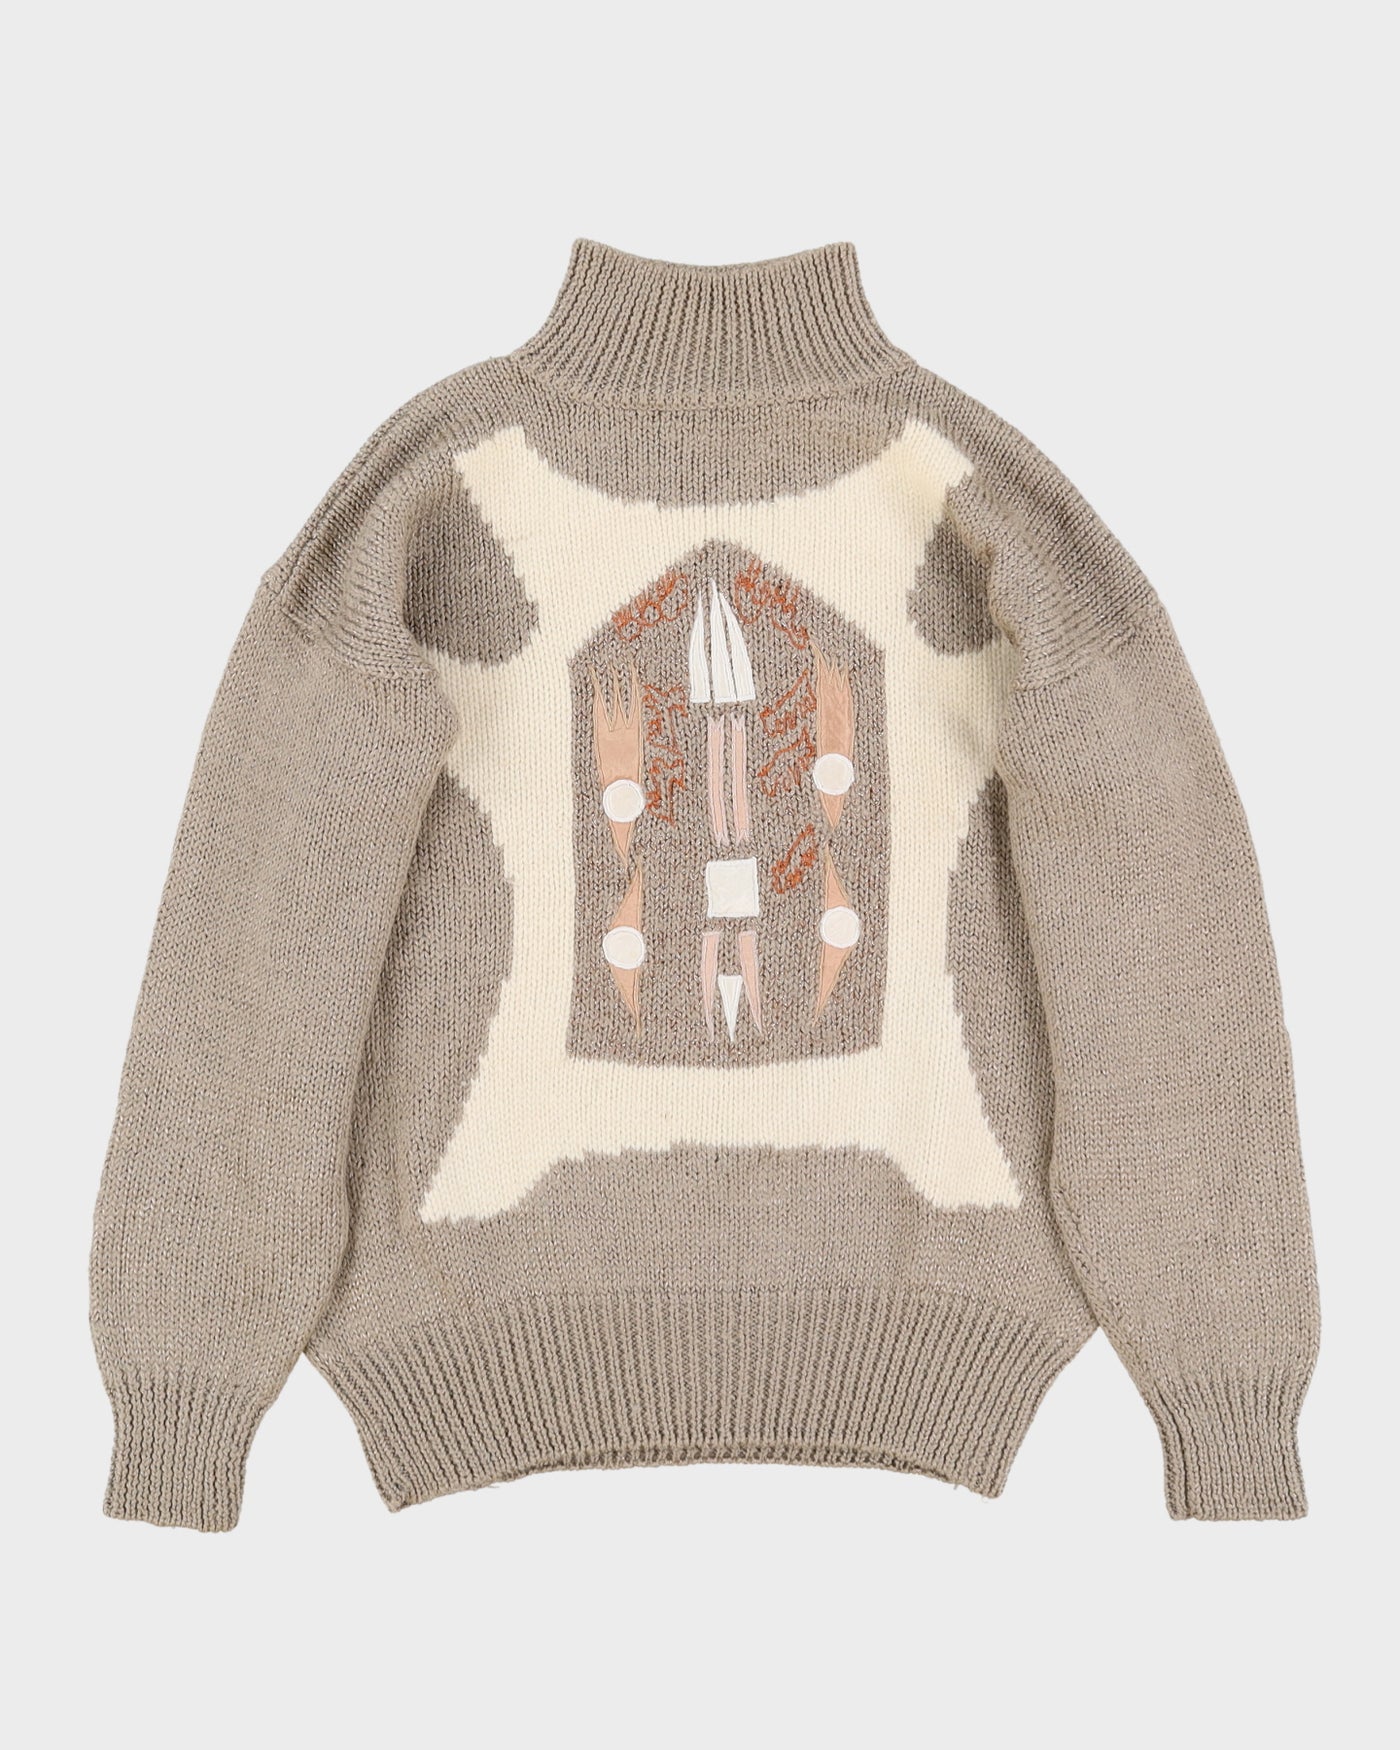 1990s Metallic Detailed Knitted Jumper - M